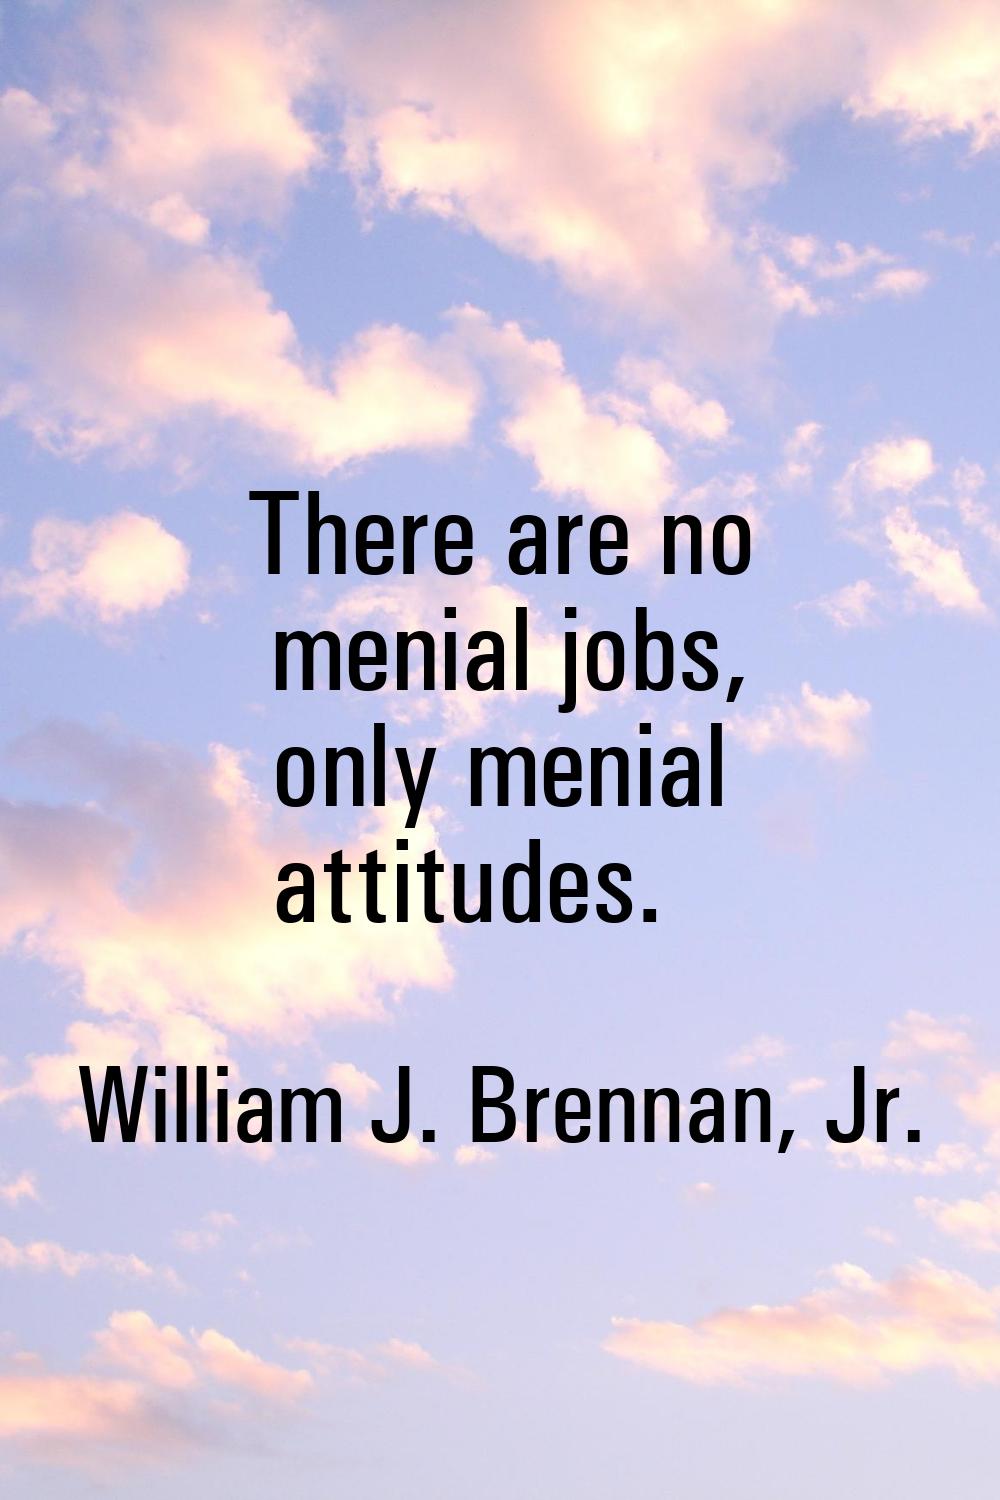 There are no menial jobs, only menial attitudes.